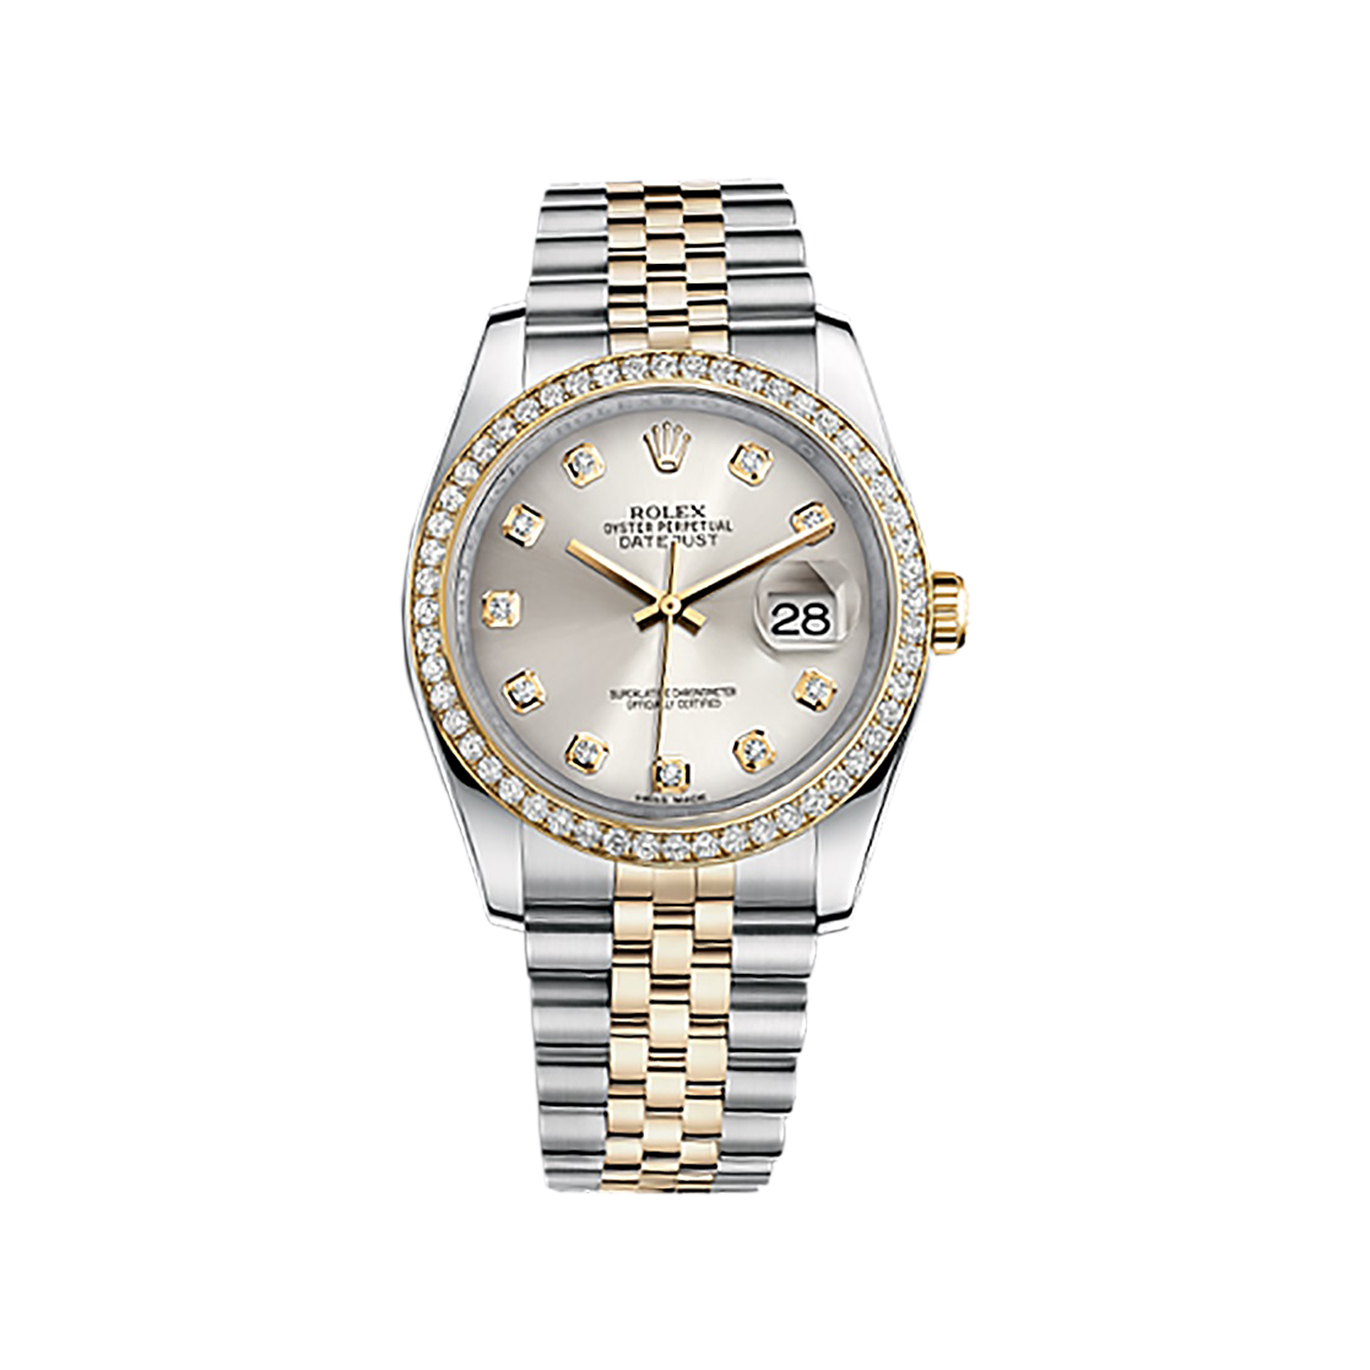 Datejust 36 116243 Gold & Stainless Steel Watch (Silver Set with Diamonds)